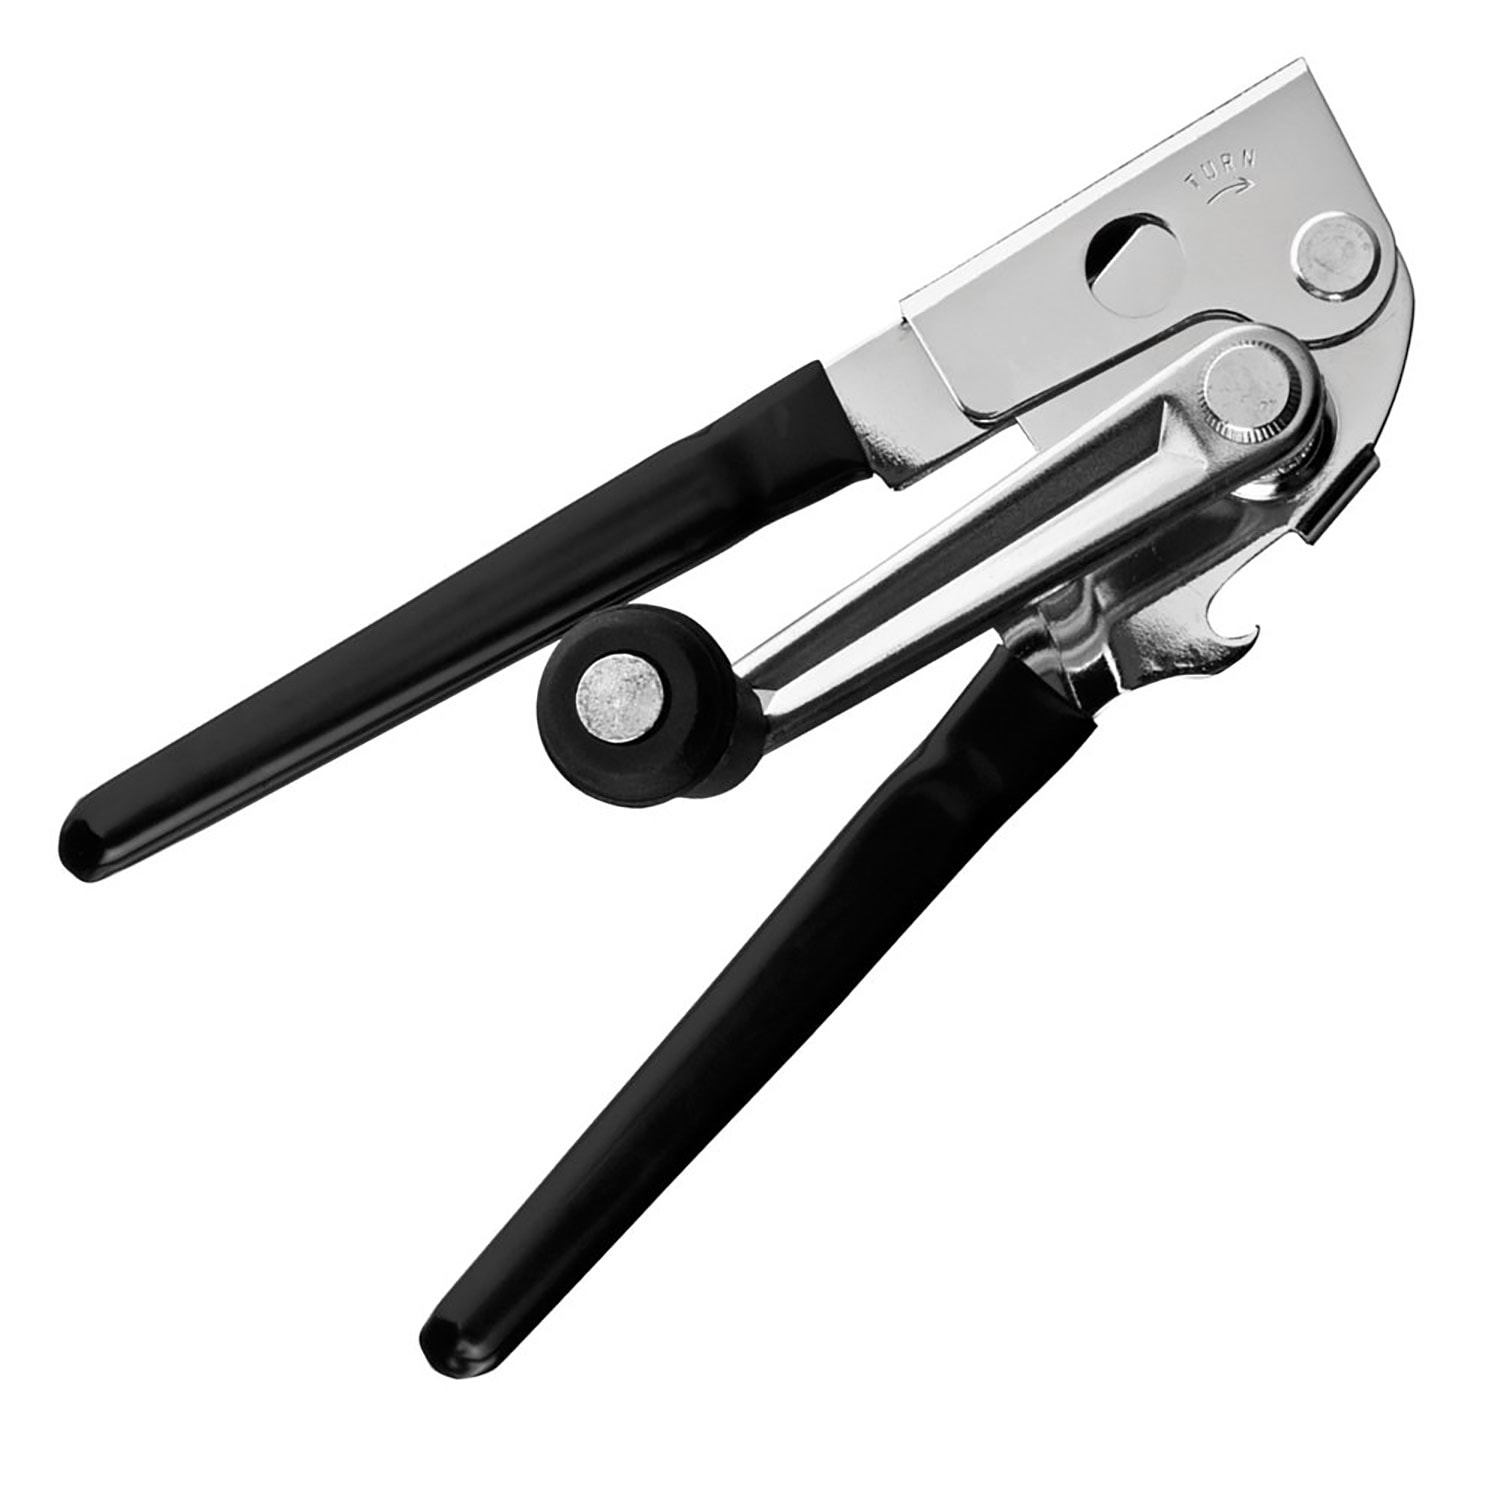 https://ak1.ostkcdn.com/images/products/is/images/direct/1f1d3c50246966ed139ccddc31819de2f766b0d5/Swing-A-Way-Easy-Crank-Can-Opener-with-Crank-Handle%2C-Black.jpg